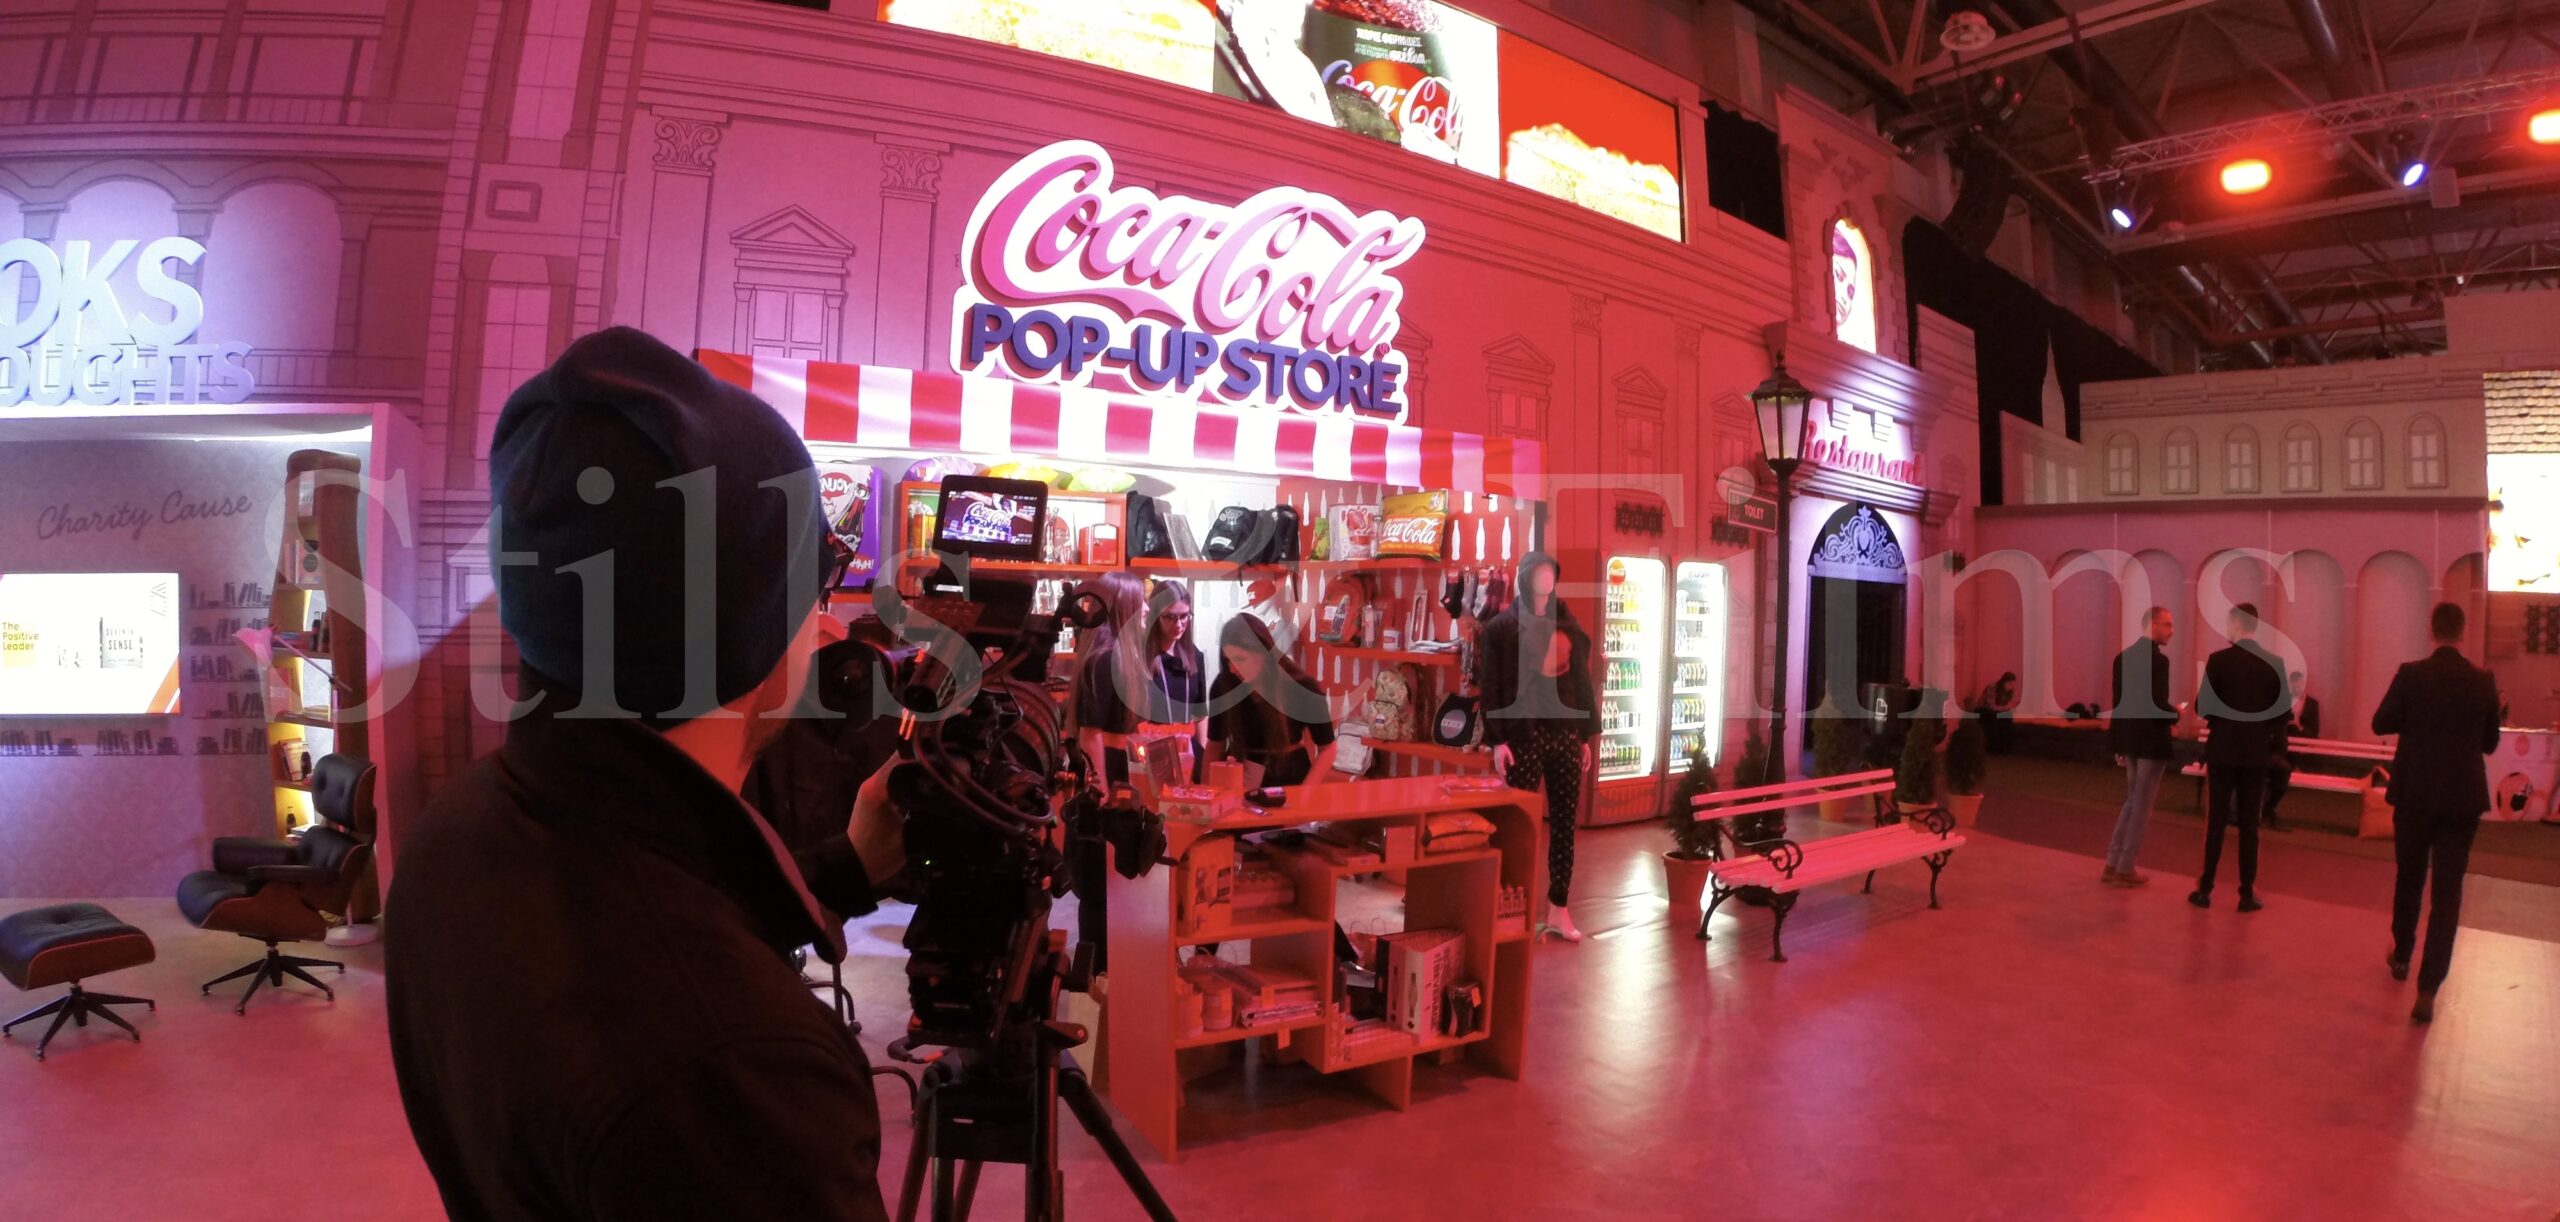 We were on a corporate shoot for Coca Cola in Belgrade.